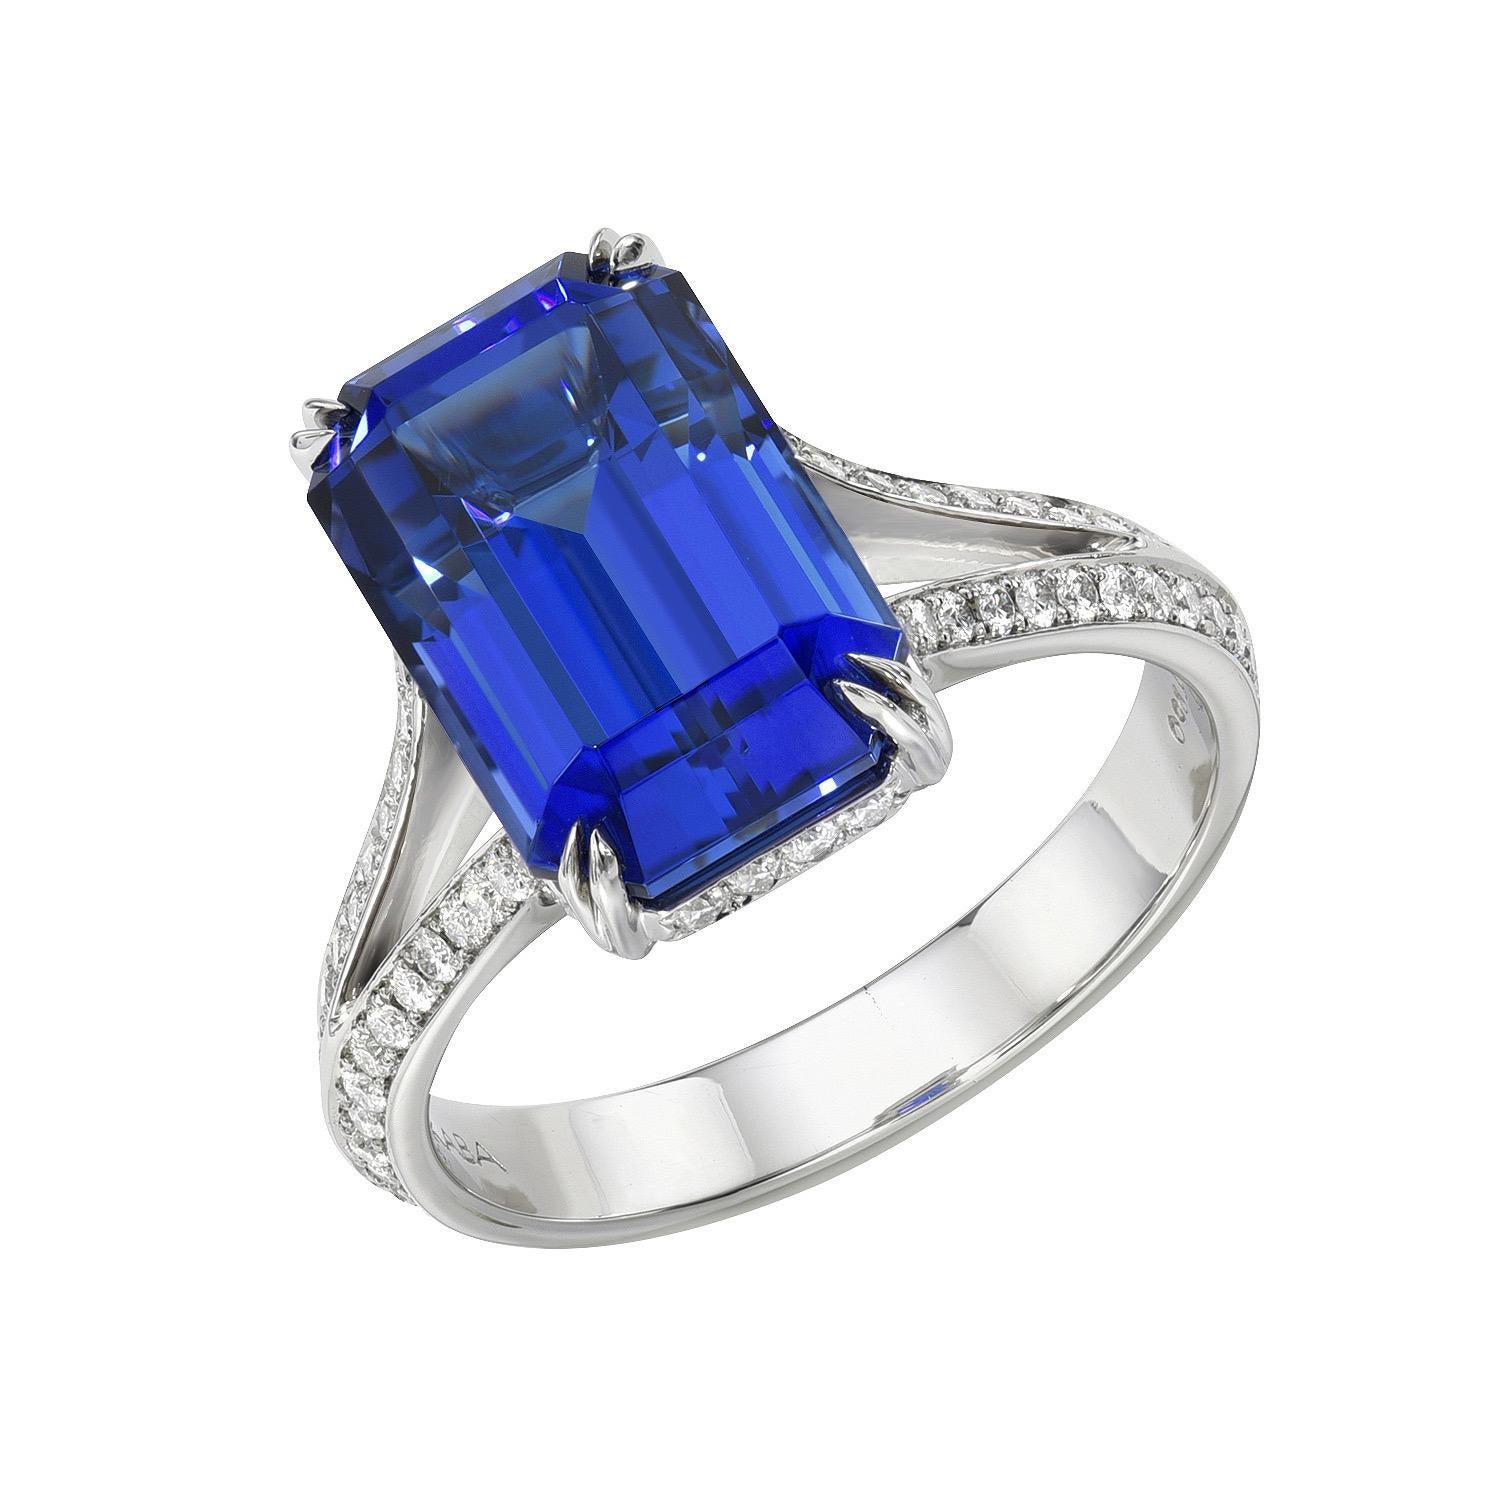 Stunning 7.11 carat Tanzanite Emerald-Cut platinum ring, decorated with a total of 0.45 carat round brilliant diamonds.
Ring size 6.5. Resizing is complementary upon request.
Crafted by extremely skilled hands in the USA.
Returns are accepted and